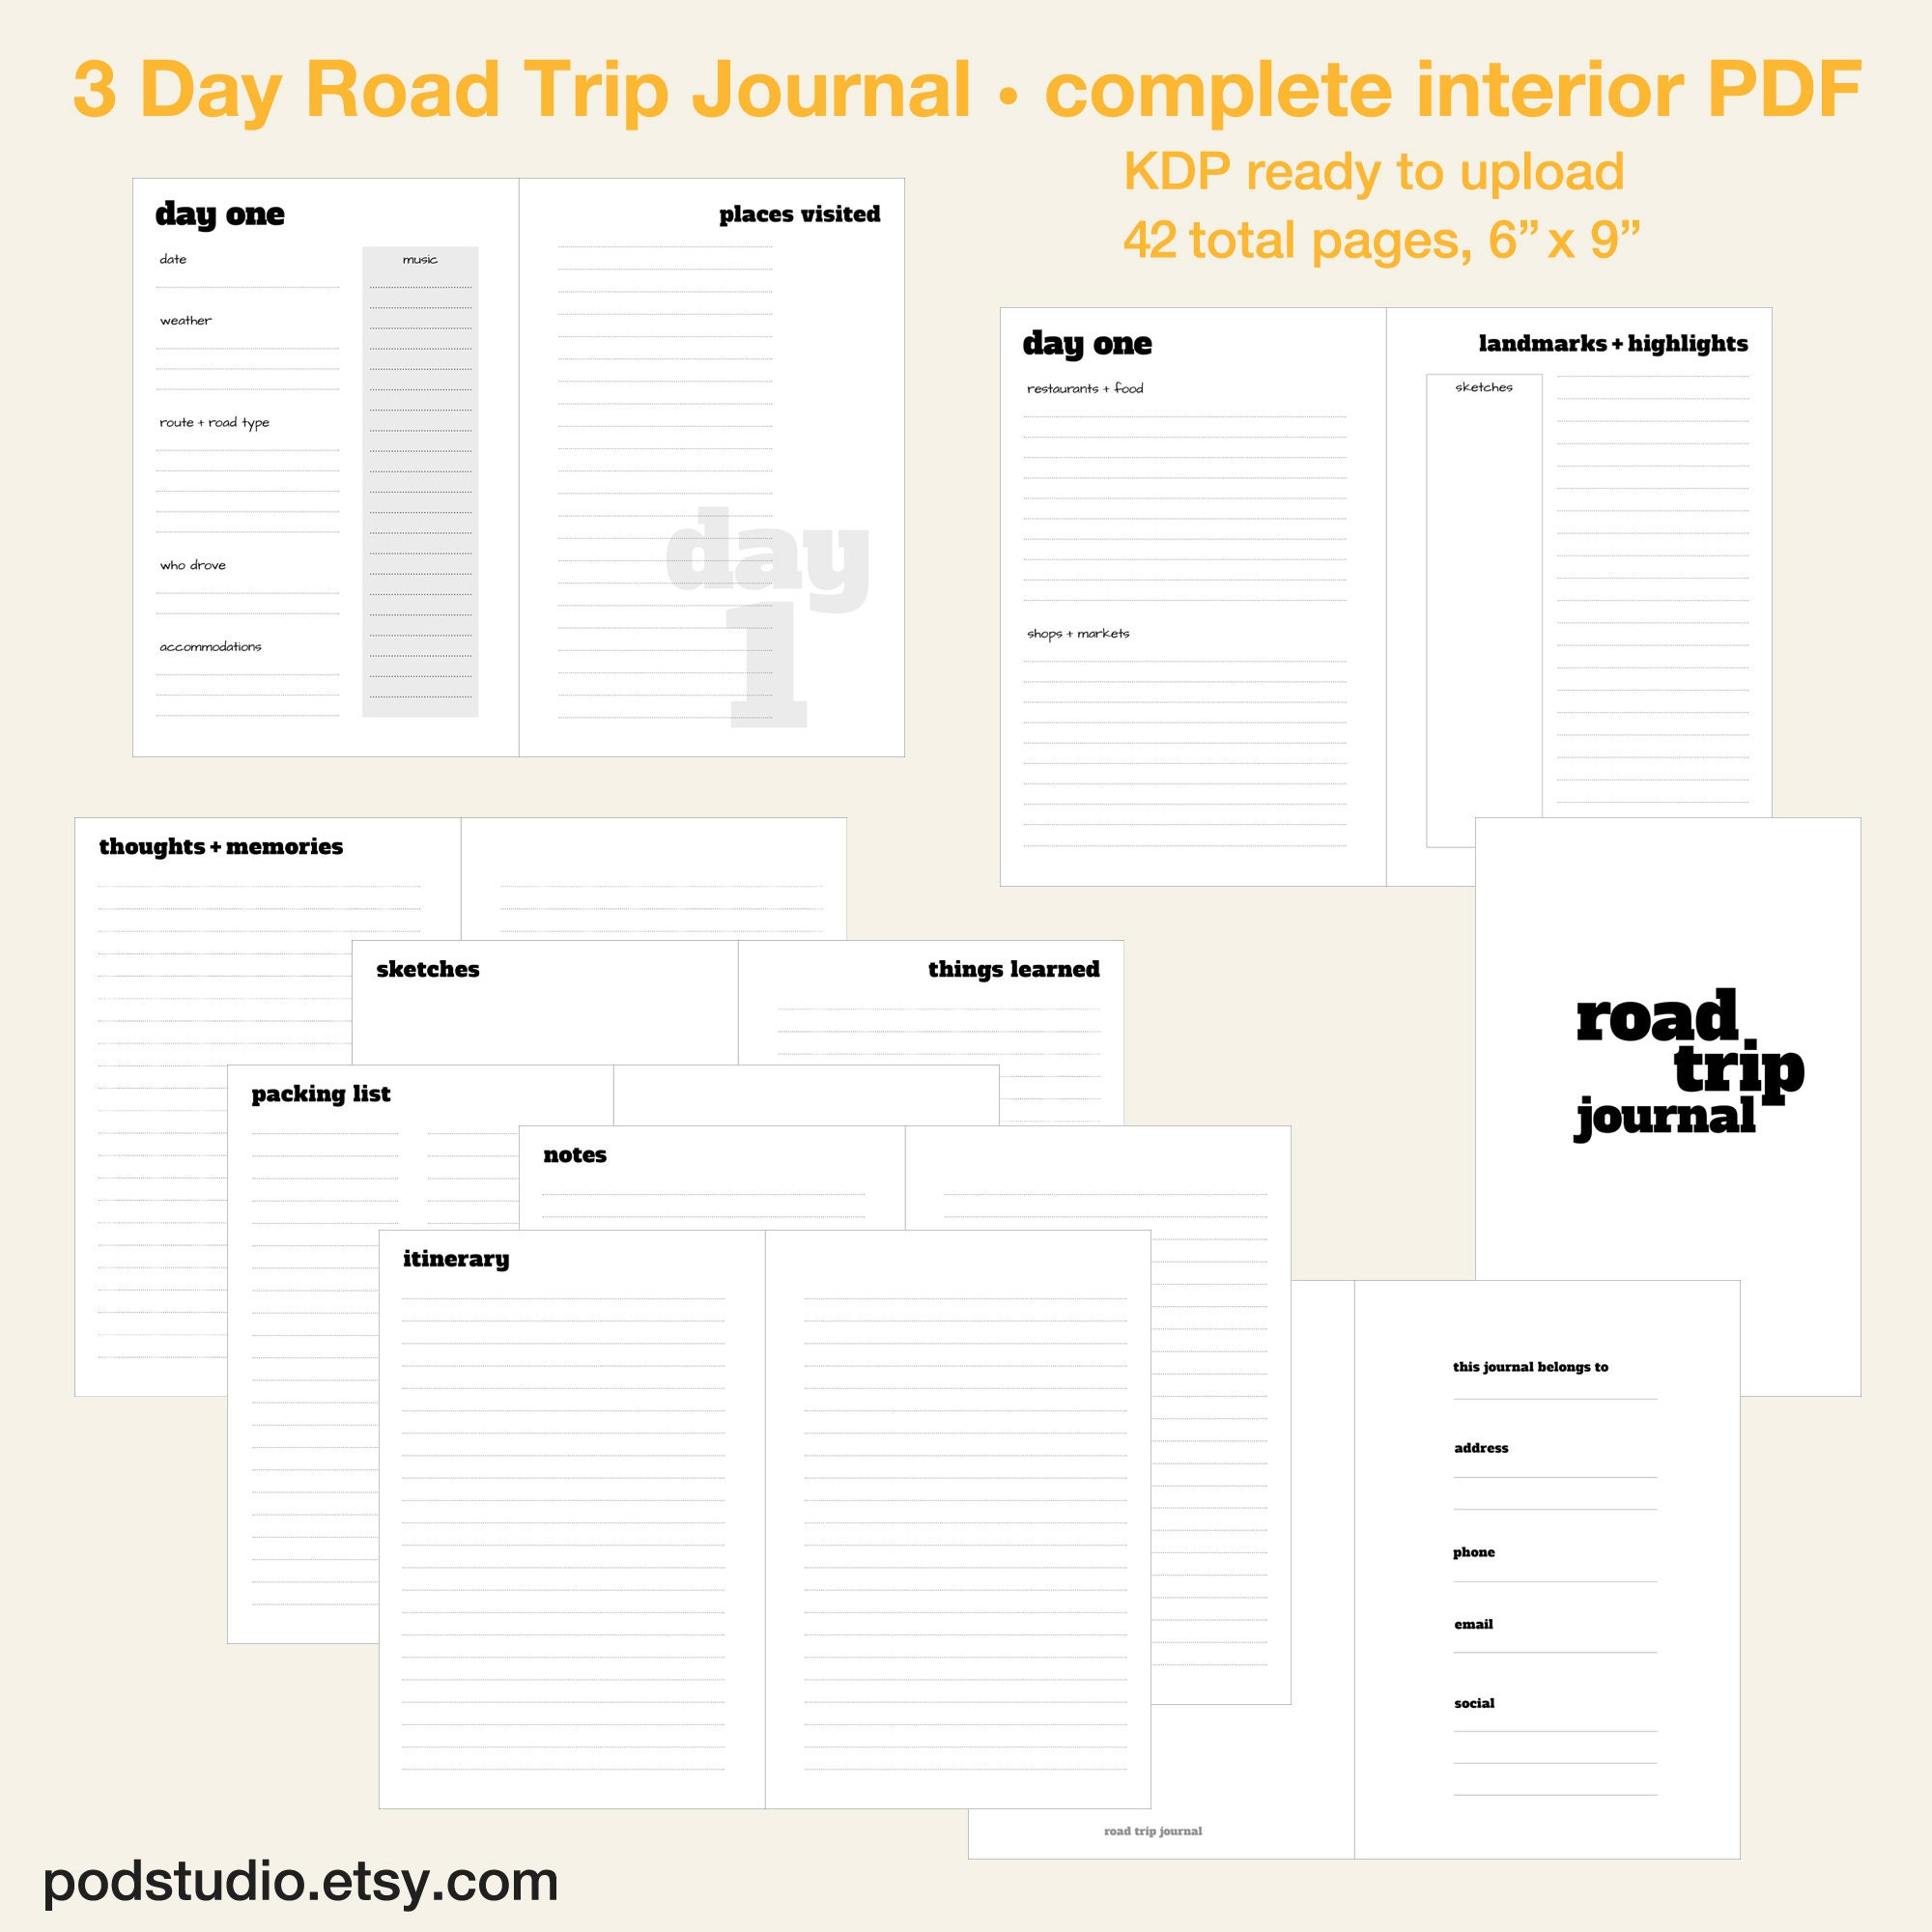 30-day-road-trip-journal-interior-template-6-x-9-amazon-kdp-etsy